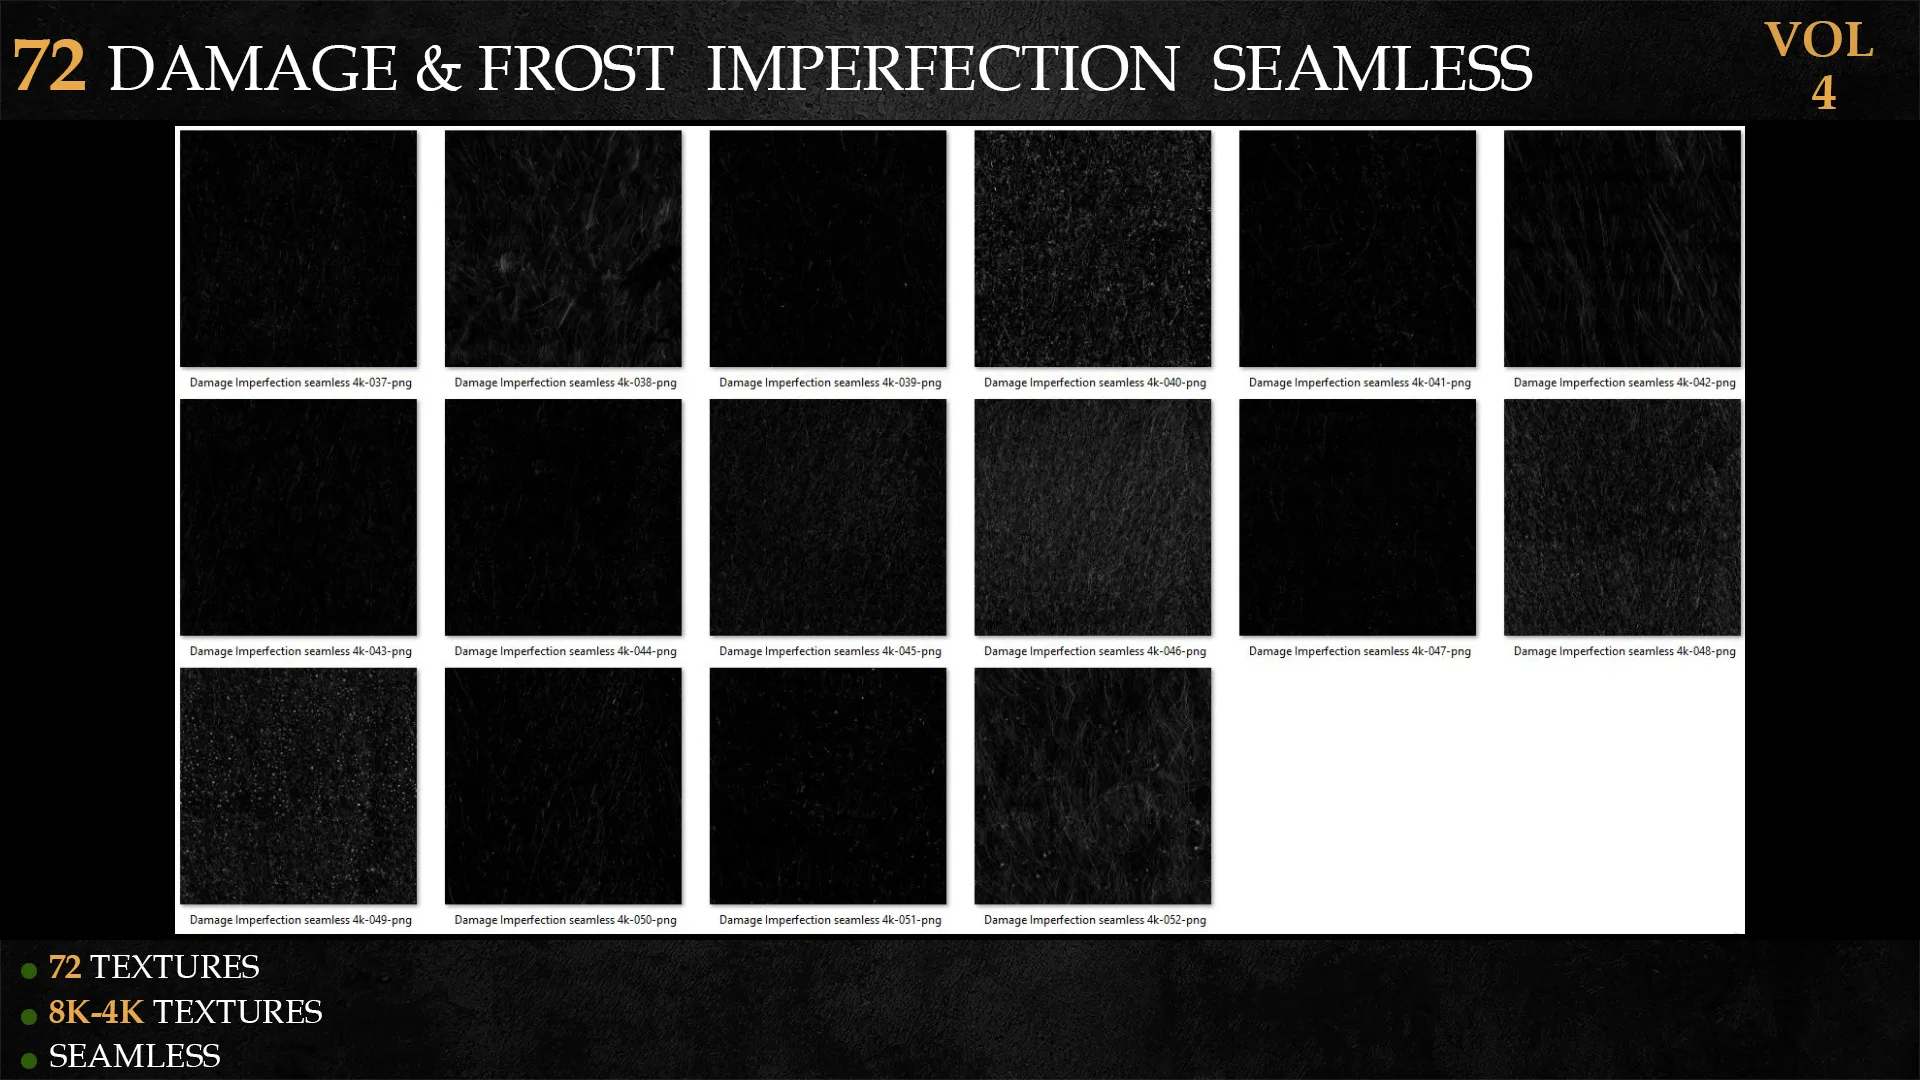 72 DAMAGE & FROST IMPERFECTION SEAMLESS-VOL 4